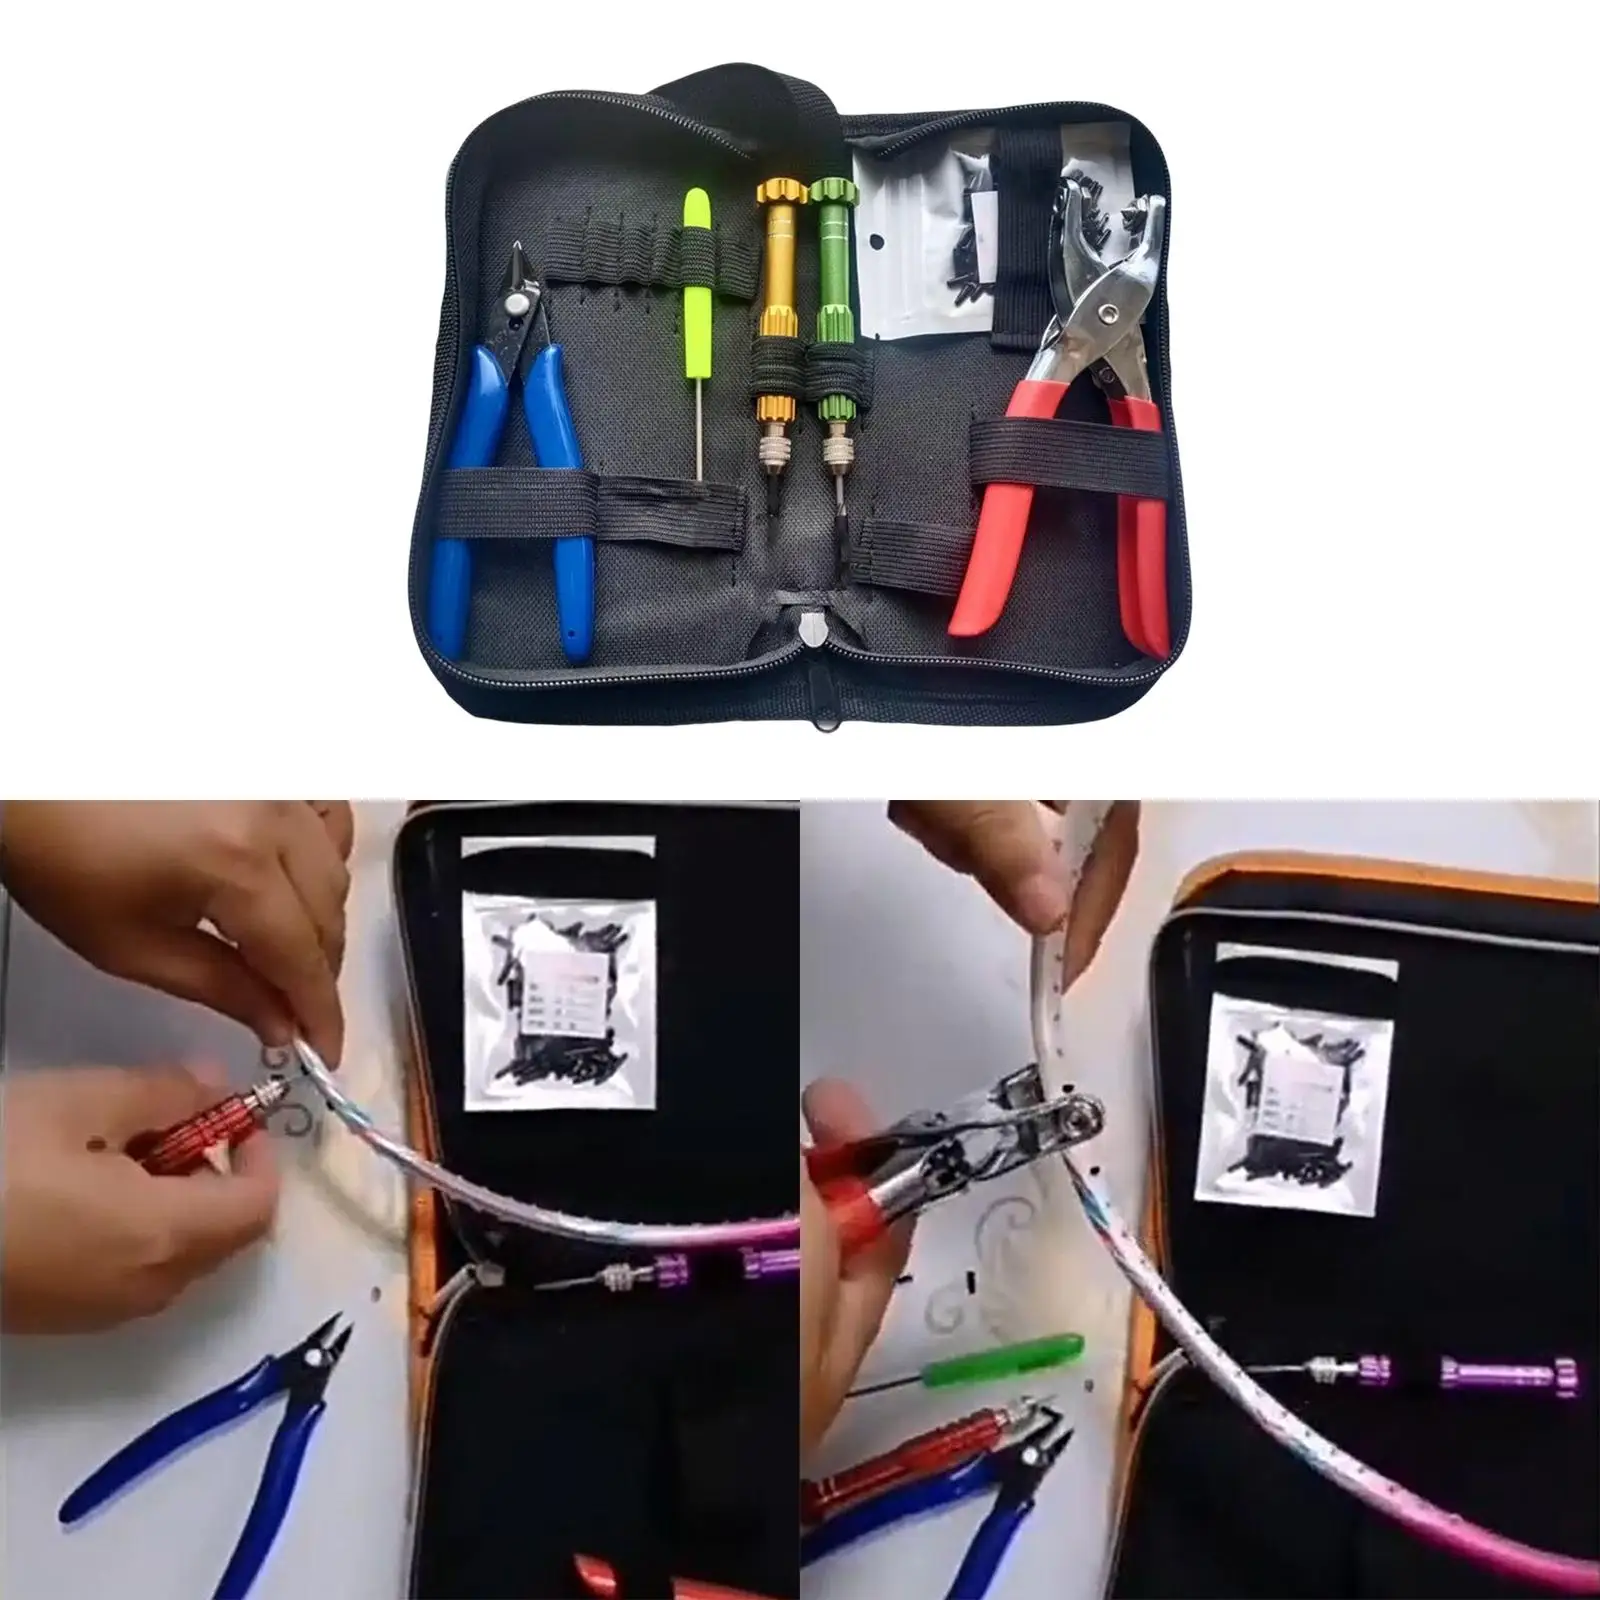 Starting Stringing Clamp Tool Kit Portable Tennis Stringer Badminton Racket Cold Press Pliers for Replacement Tennis Racket